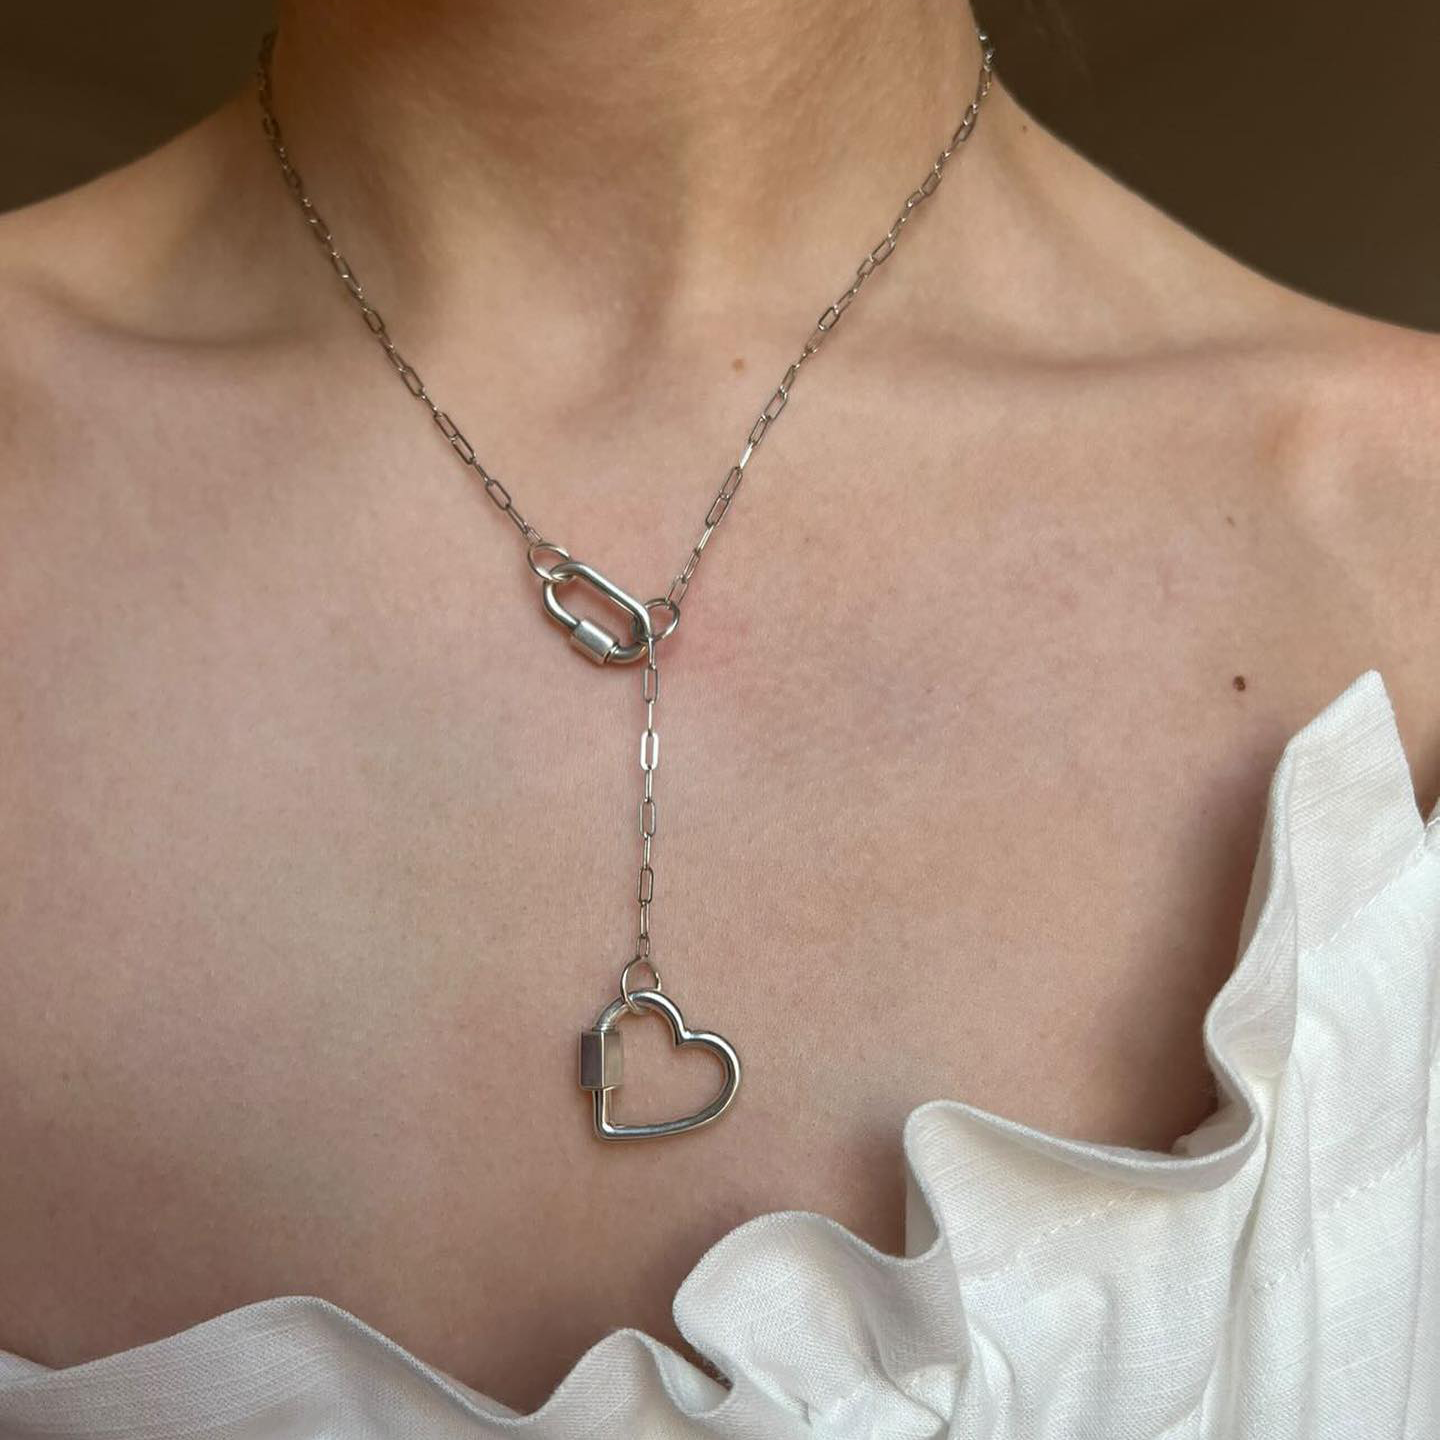 Close up of woman's decolletage wearing necklace with sterling silver heart charm